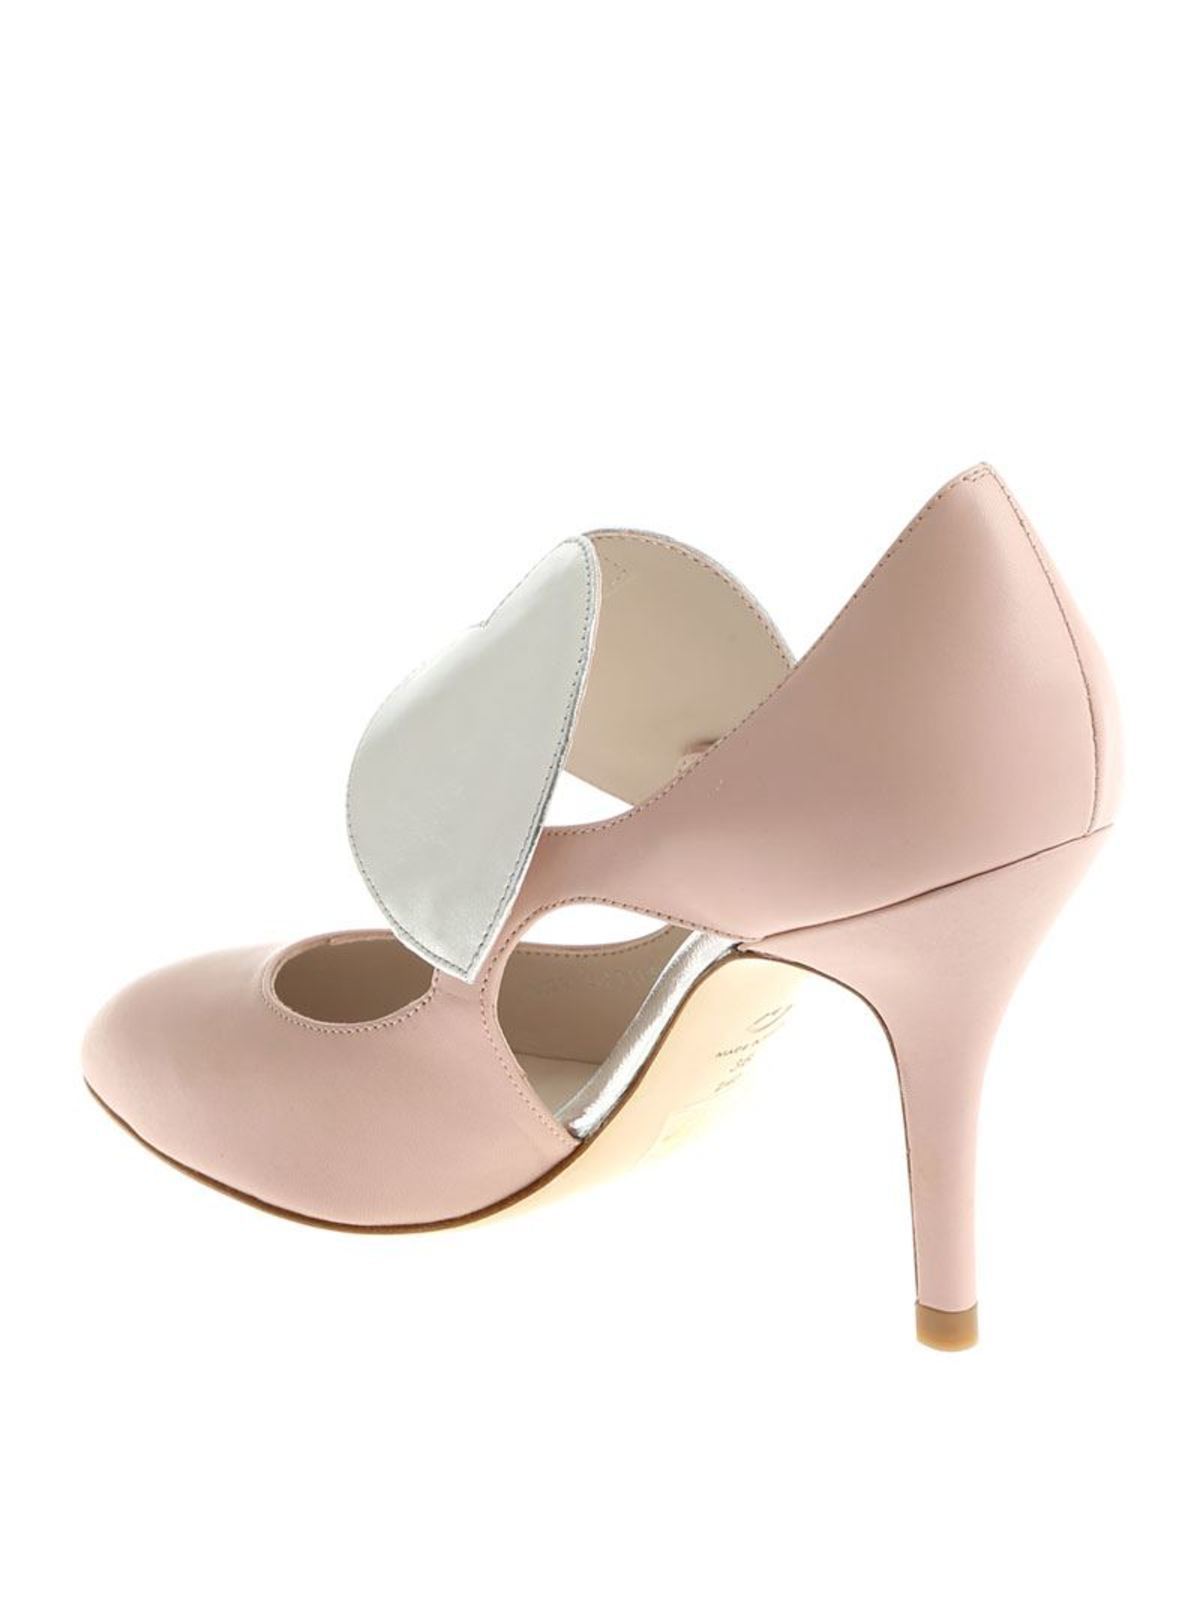 Court shoes Lulu Guinness - Cut-out detailed pumps - 50140541ROSE